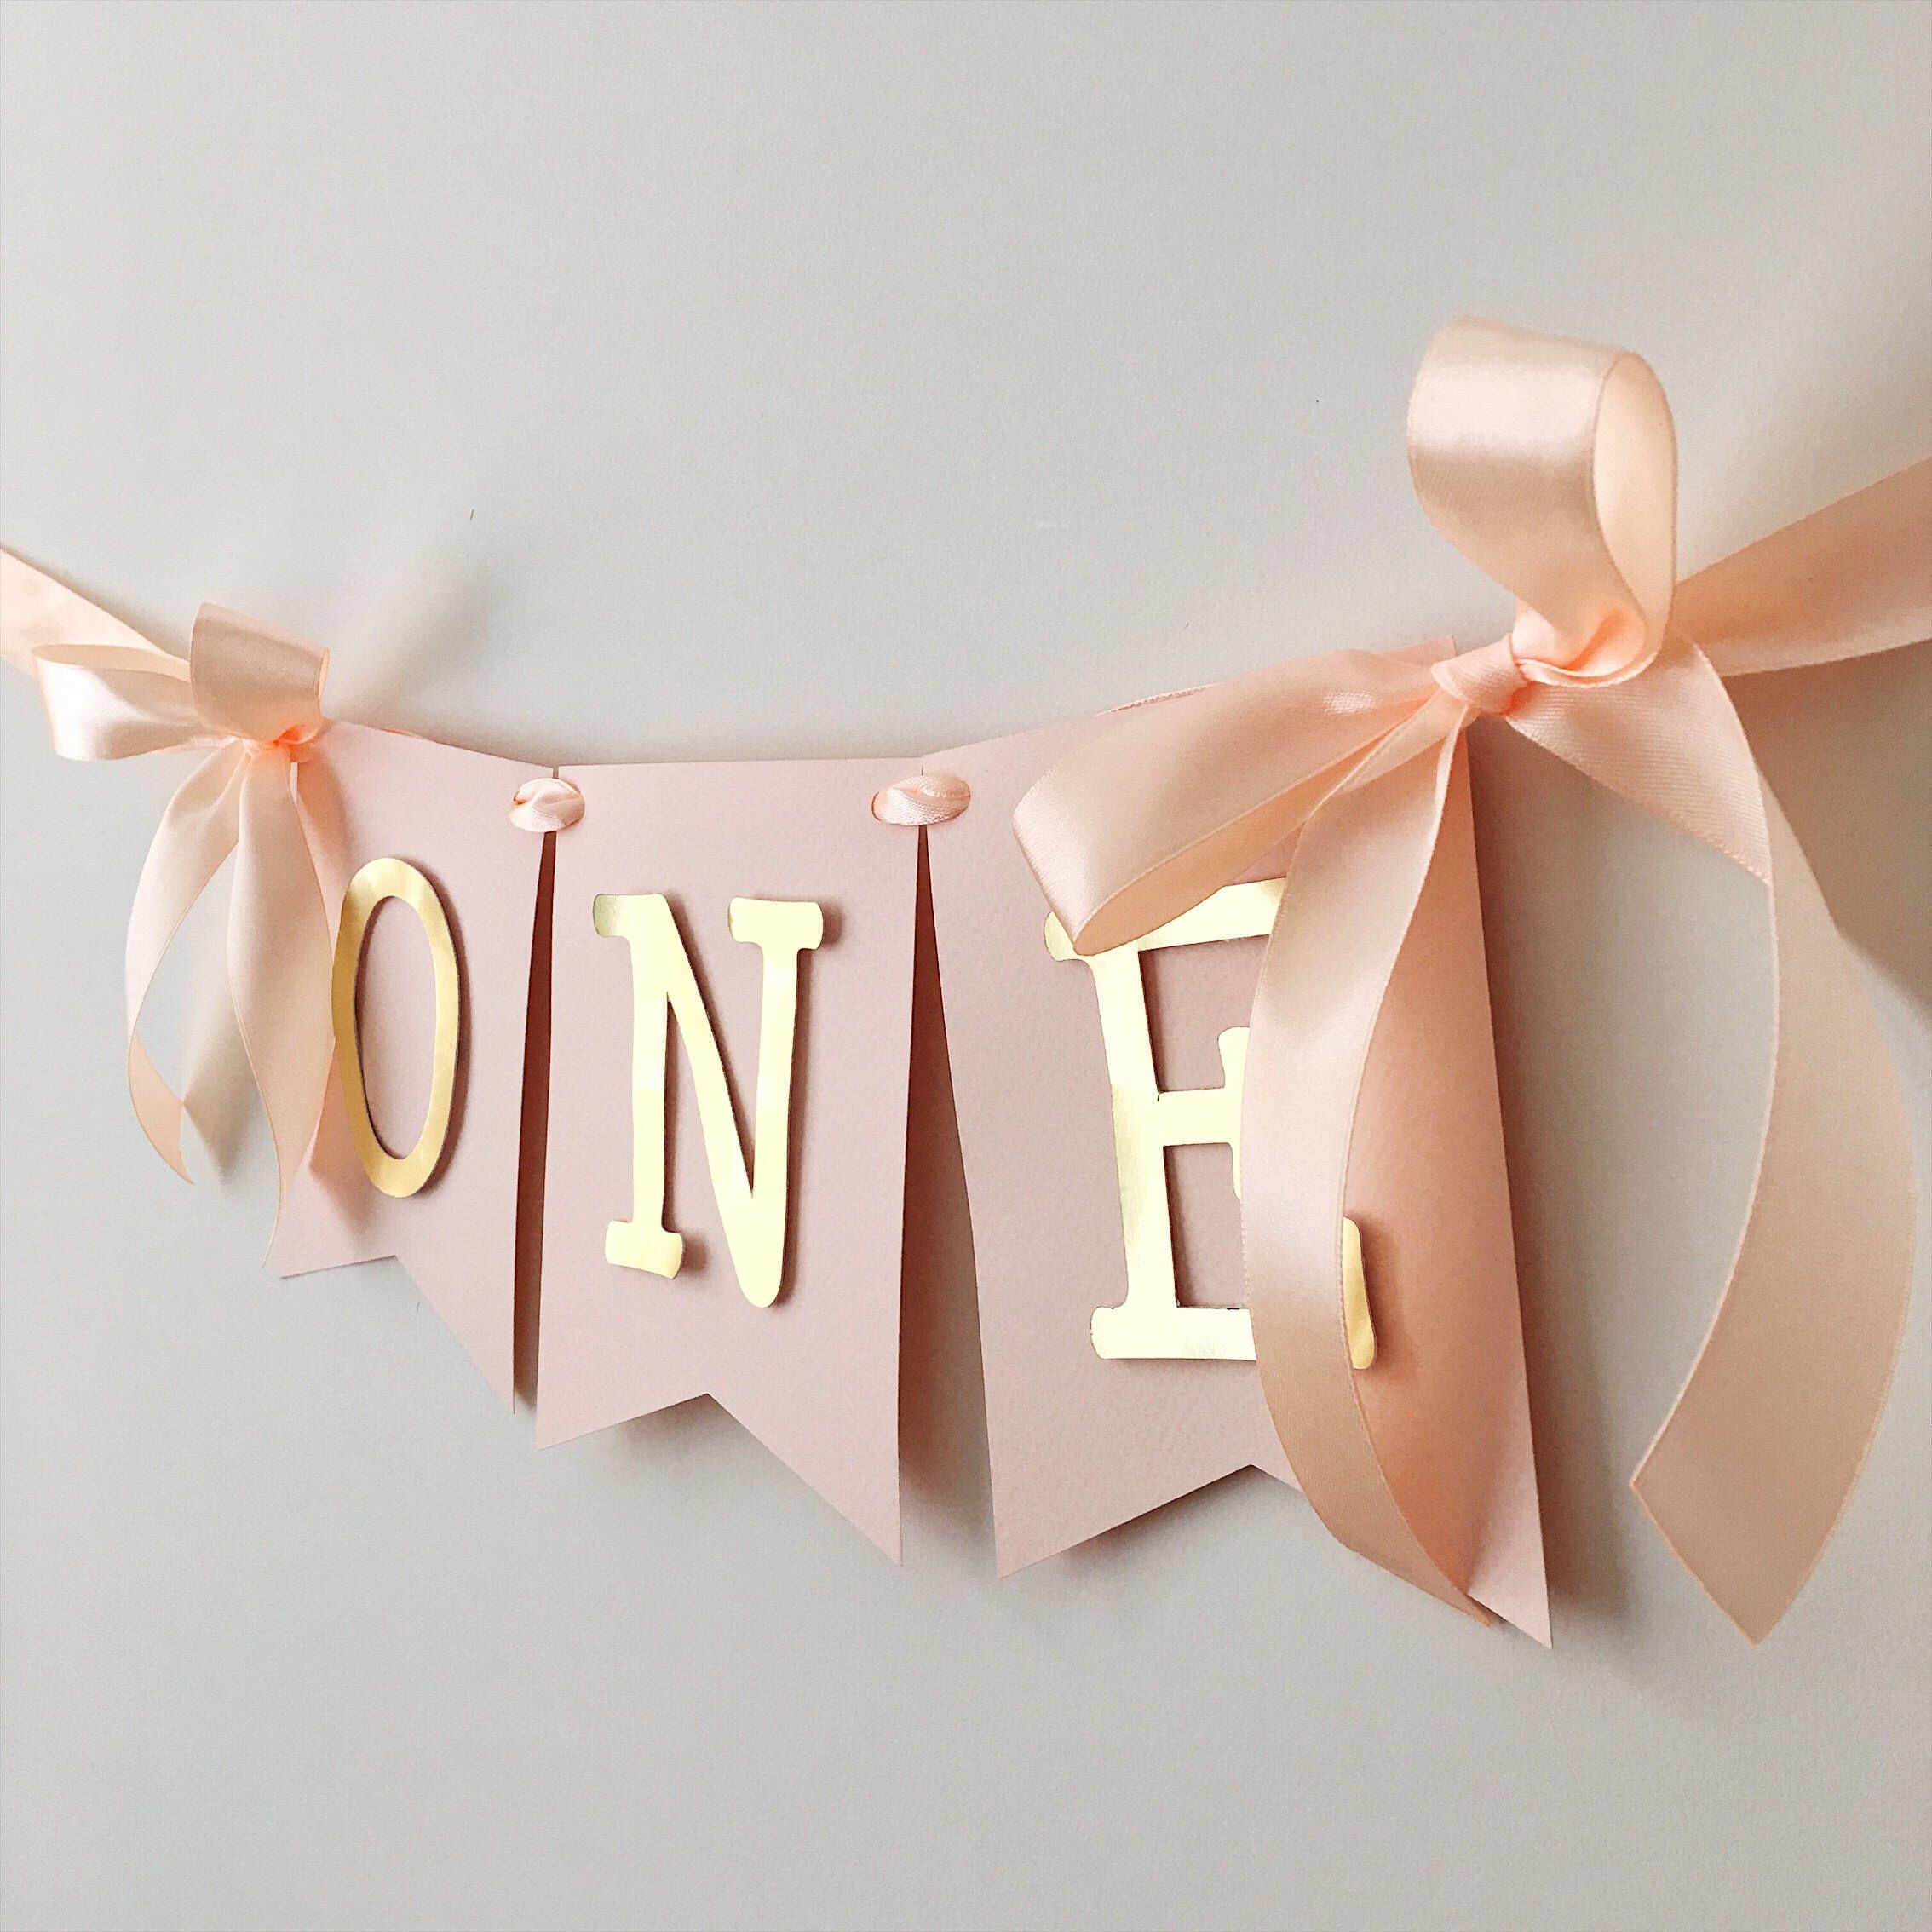 Rose Blush Gold High Chair Banner One High Chair Sign Baby Girl 1 st Birthday Banner Decorations One Year Birthday One Photo Prop -   One year birthday photo ideas